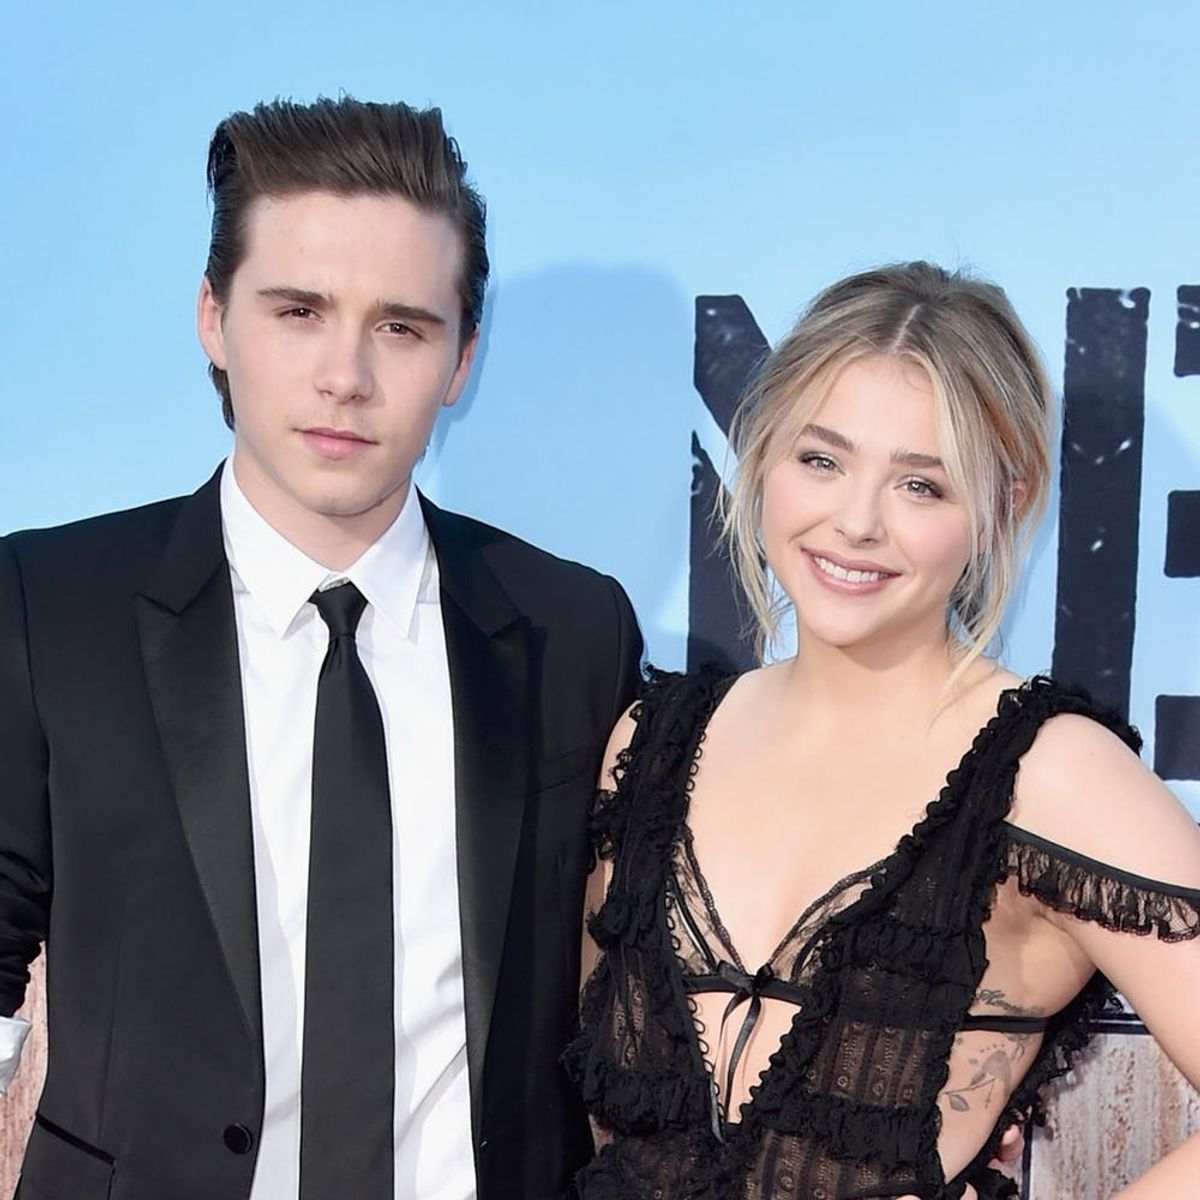 Brooklyn Beckham Posted the Cutest Throwback With Chloë Grace Moretz